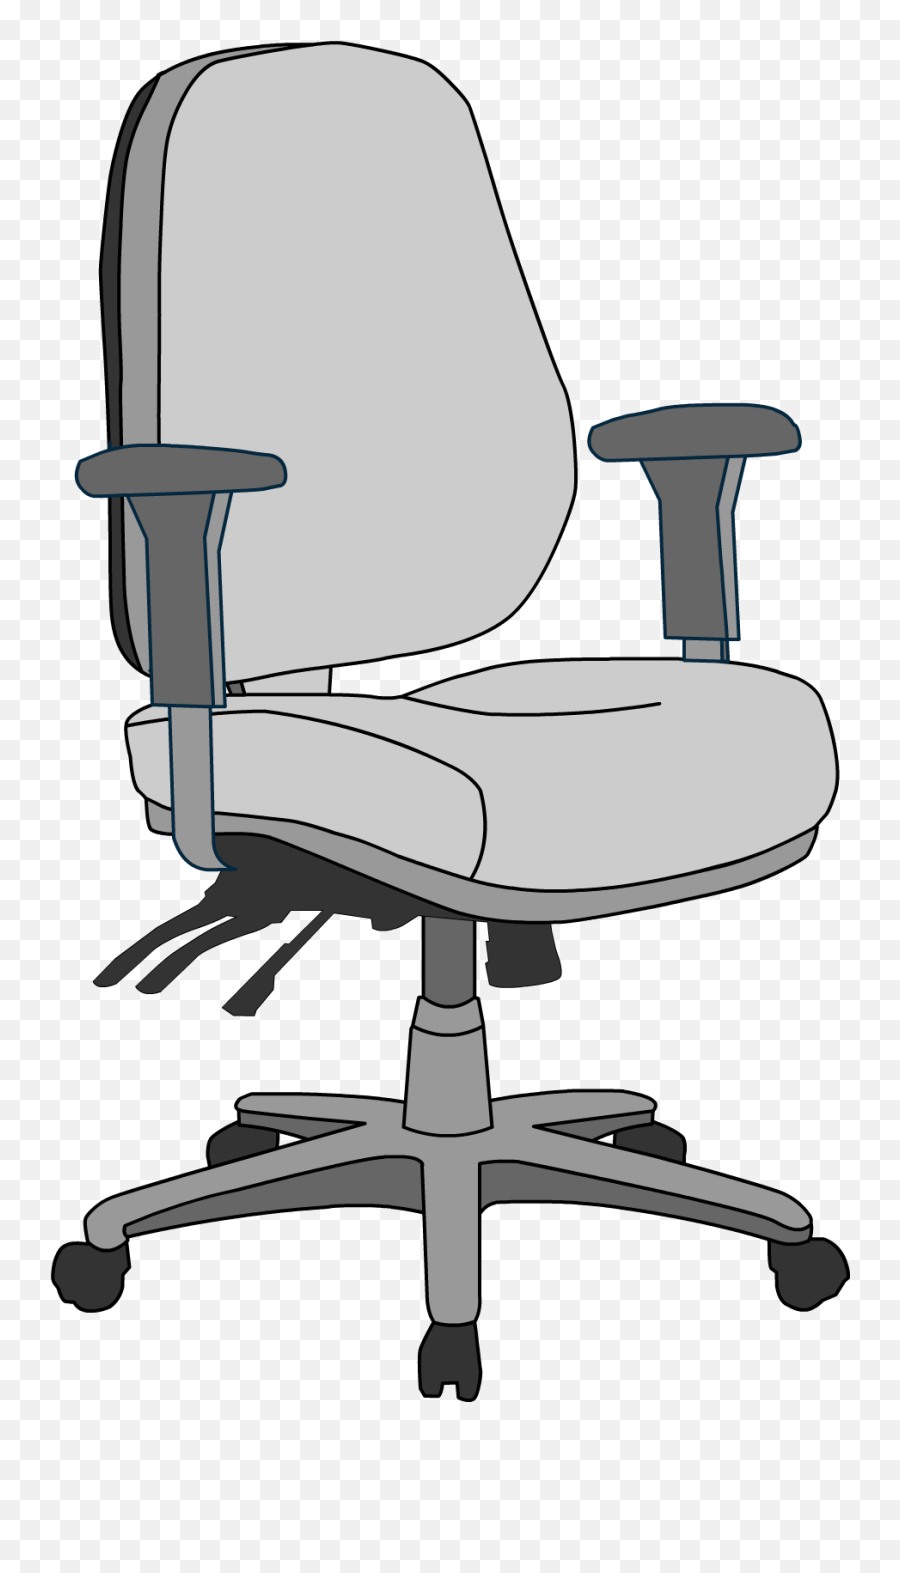 Drawing Chairs Classroom - Chair Clipart Full Size Clipart Classroom Chair Drawing Emoji,Chair Clipart